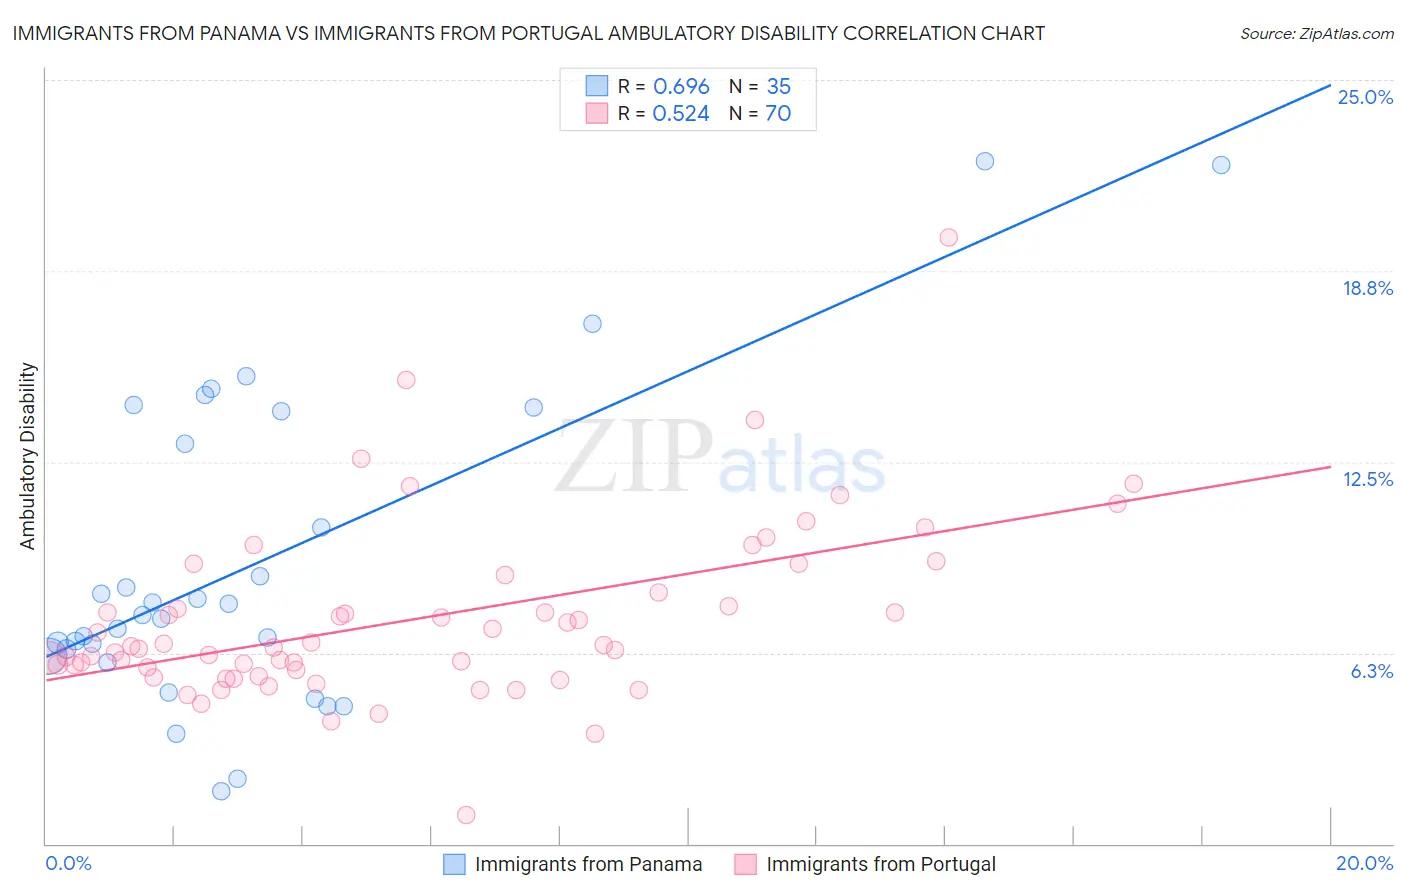 Immigrants from Panama vs Immigrants from Portugal Ambulatory Disability